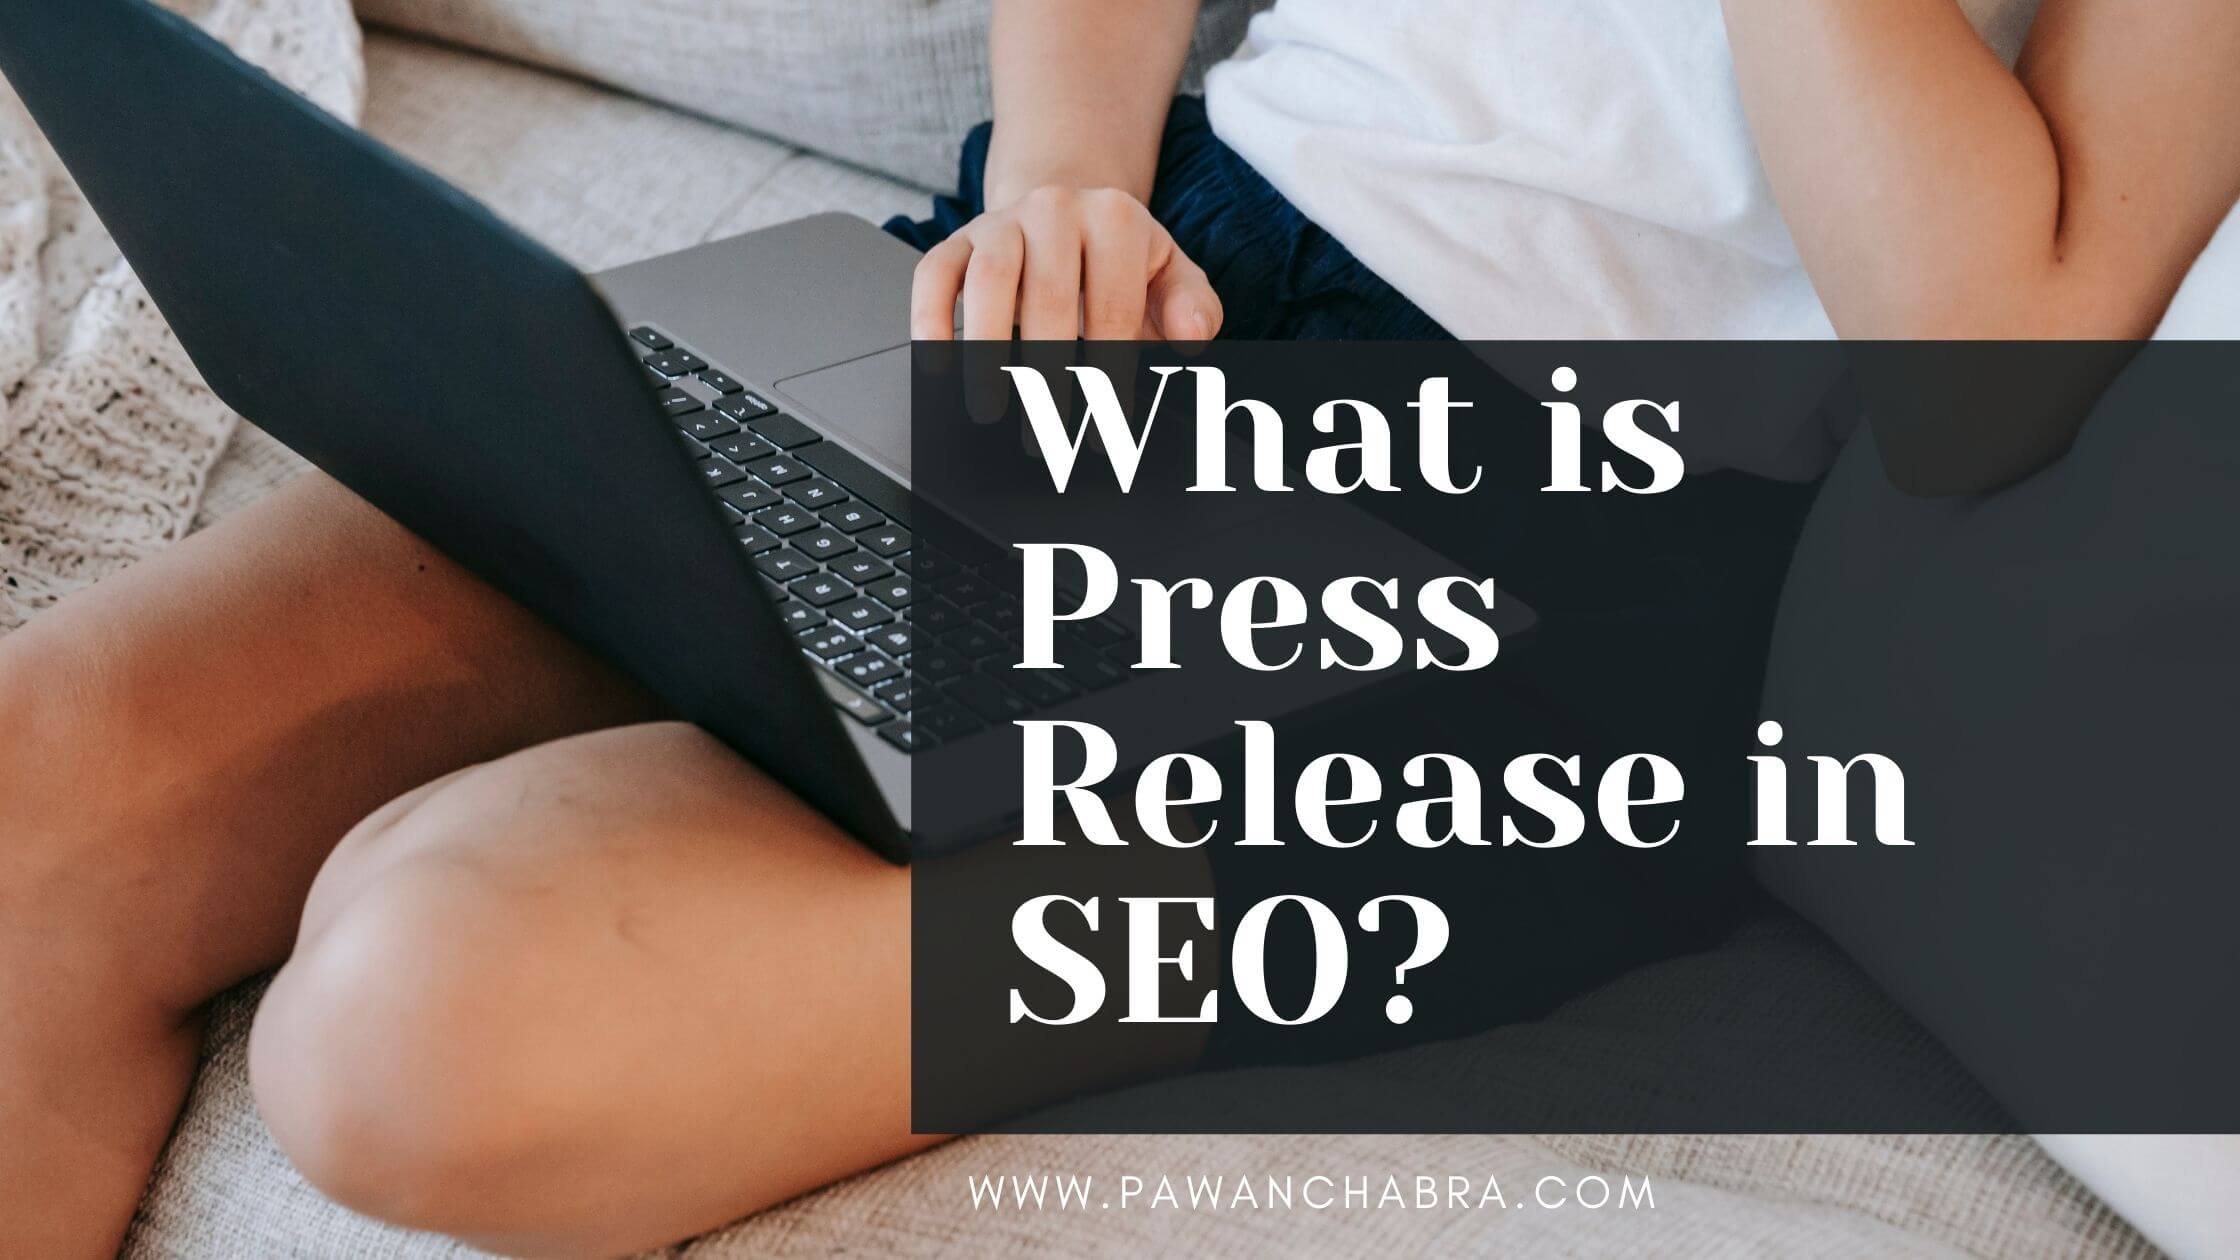 WHAT IS PRESS RELEASE IN SEO & HOW DOES IT WORK?